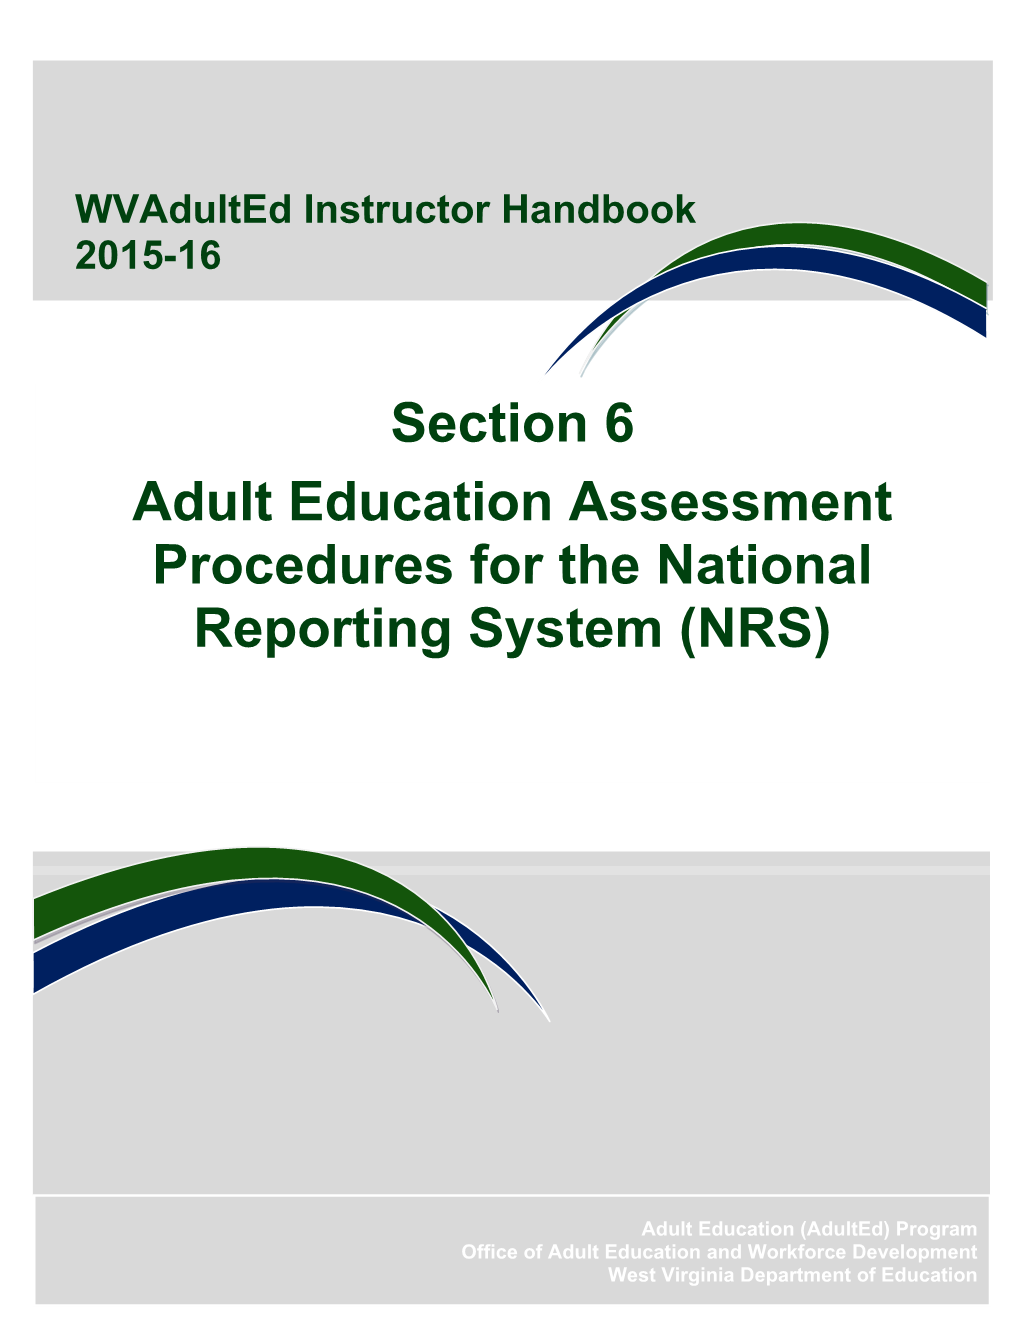 Adult Education Assessment Procedures for The